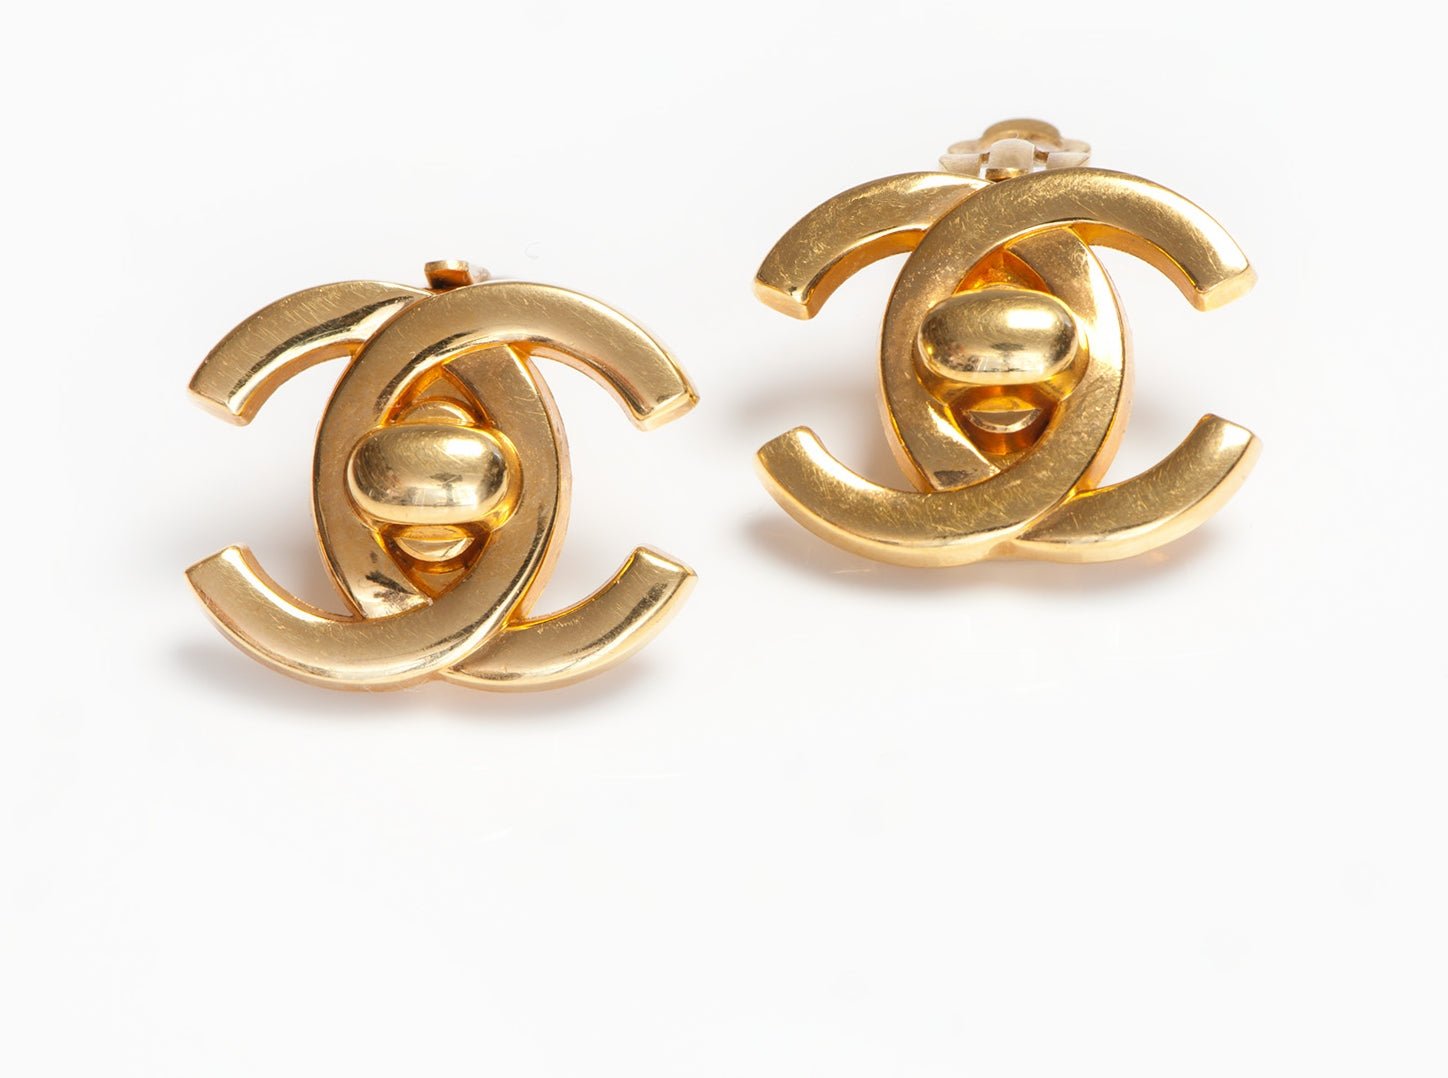 Chanel Paris Fall 1995 Gold Plated CC Turnlock Earrings